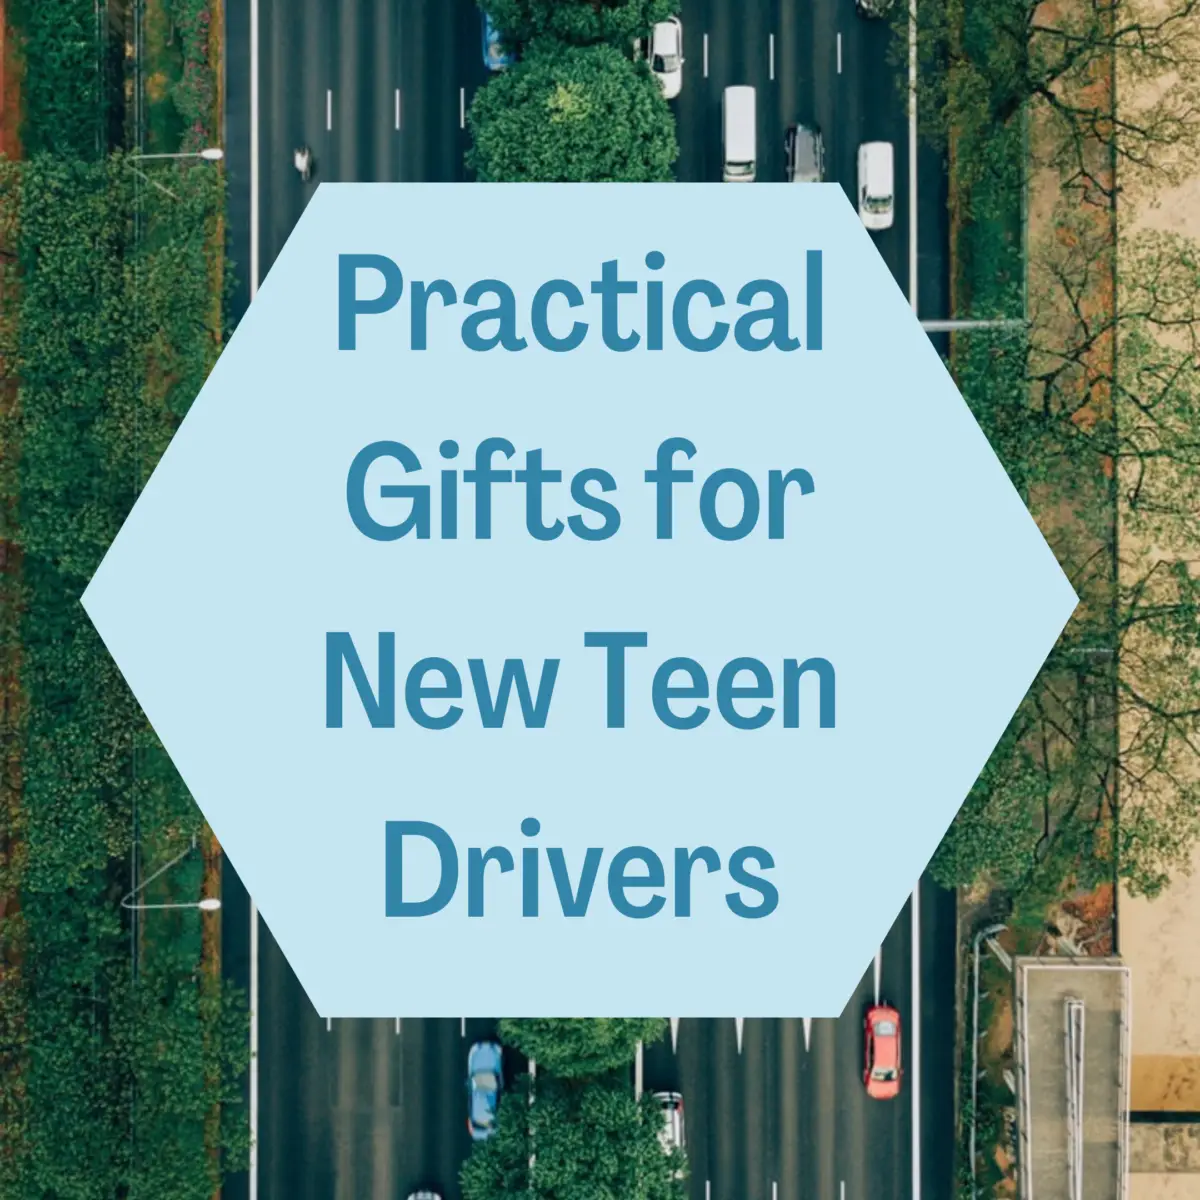 Gifts for New Teen Drivers